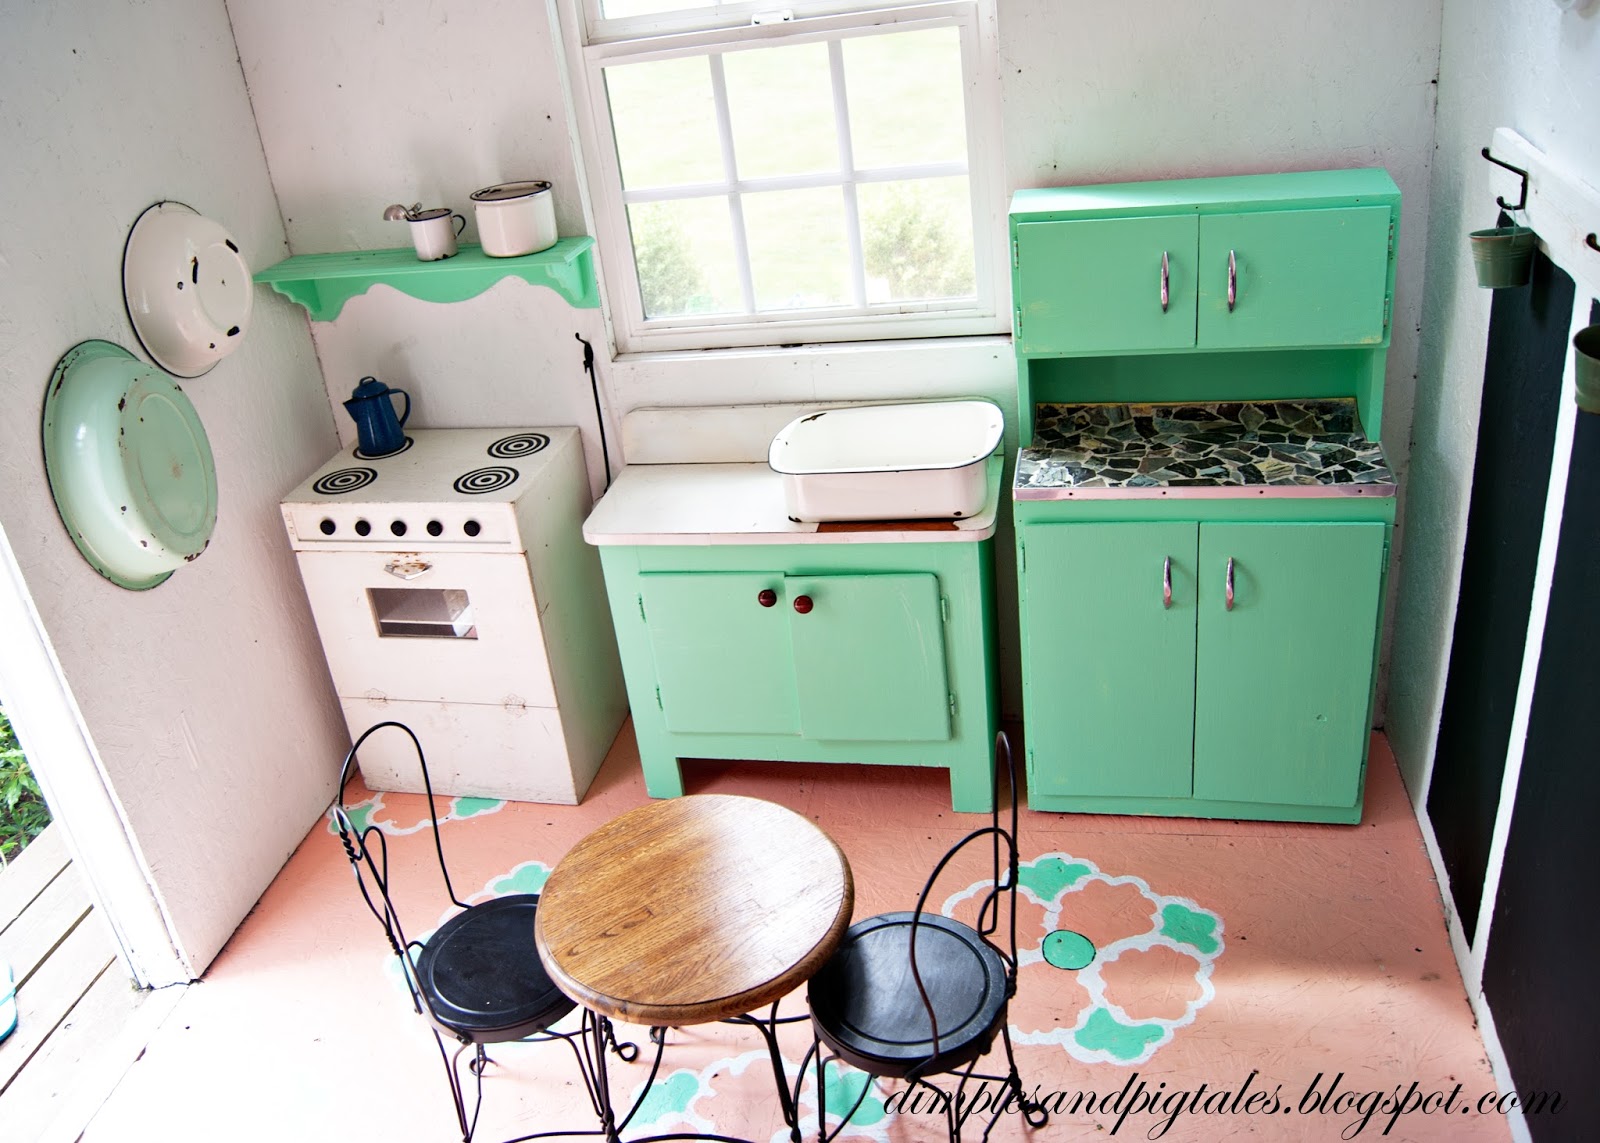  Playhouse with mint green cabinets, coral painted floor, chalkboard wainscoting and vintage accessories.